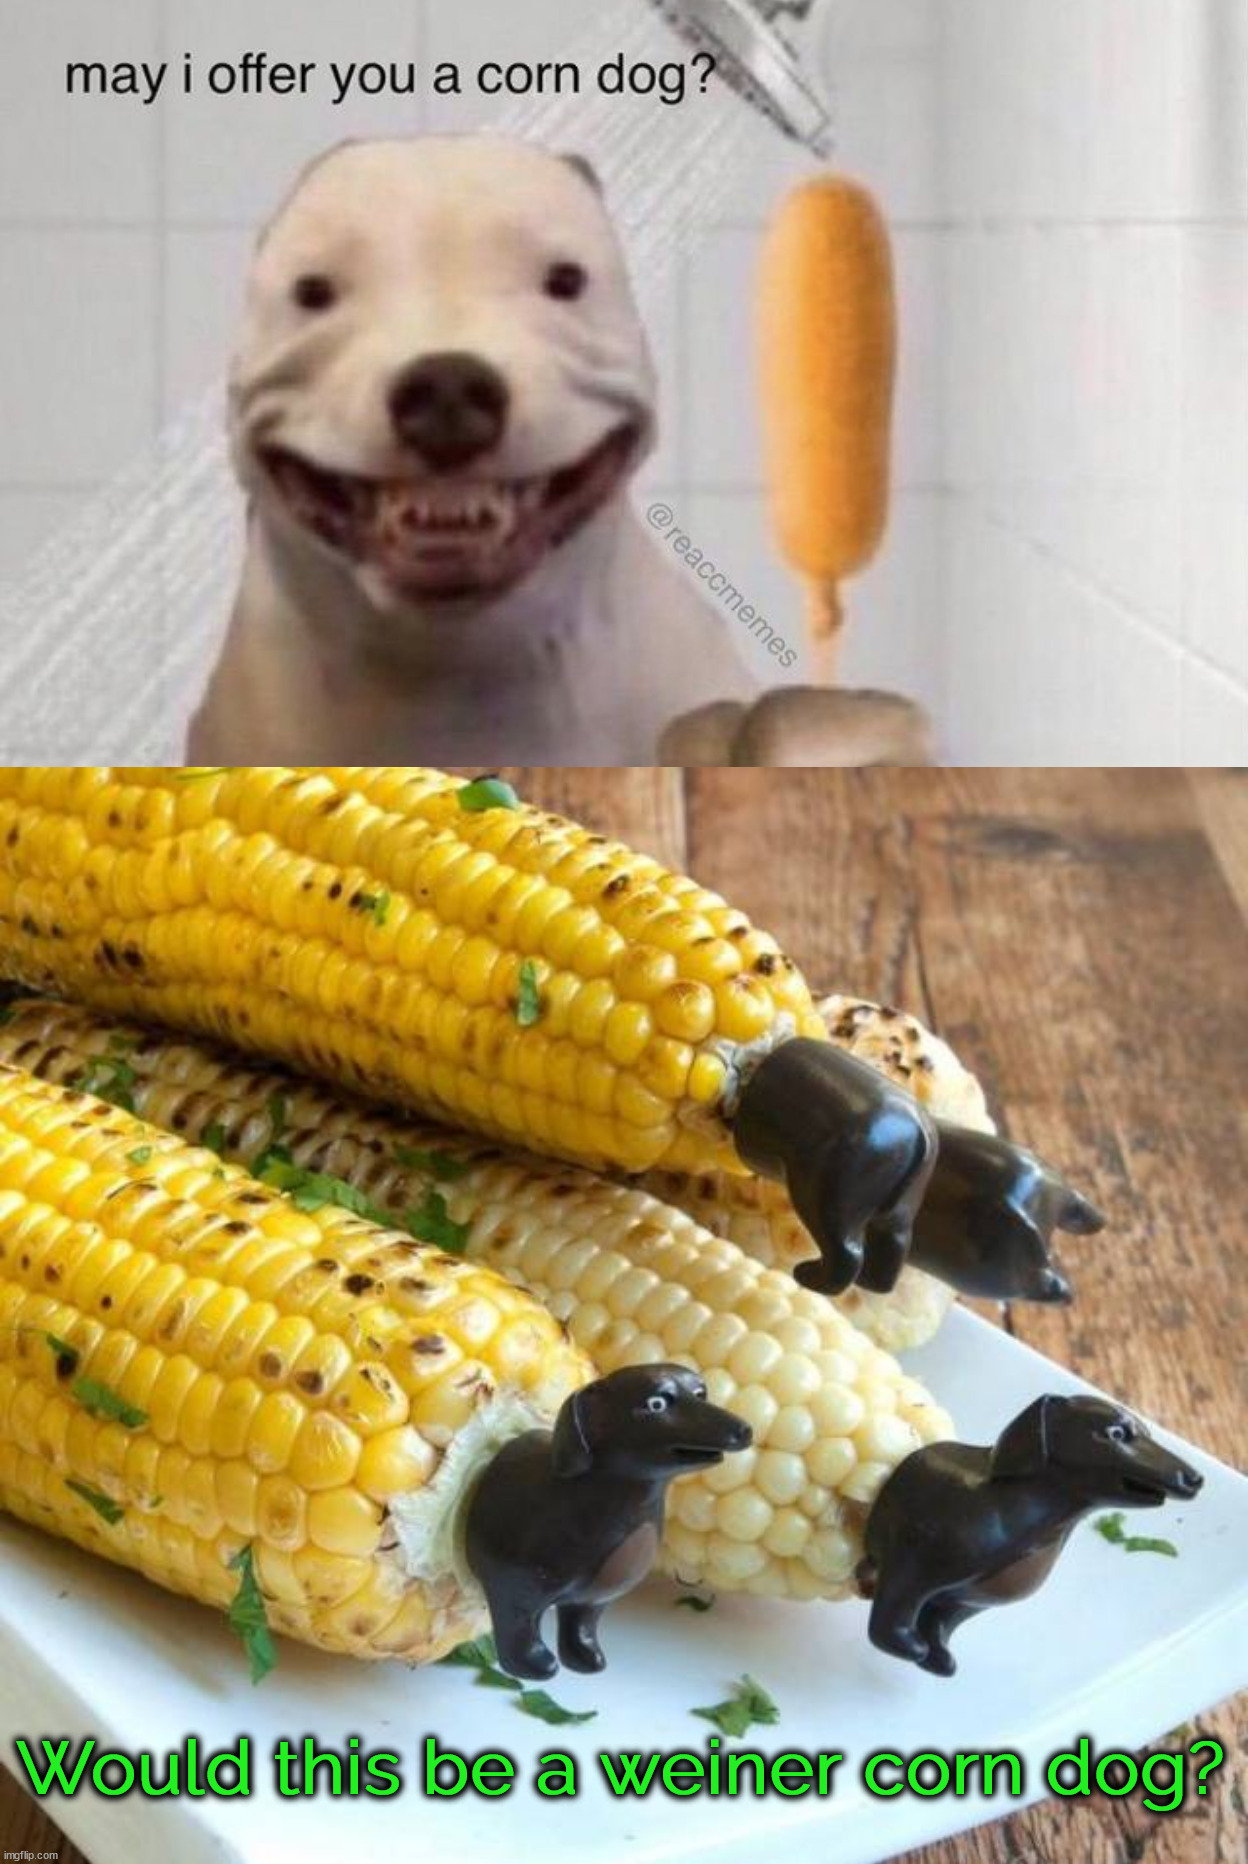 Love corndogs | Would this be a weiner corn dog? | image tagged in may i offer you a corn dog,weiner dog,corn on the cob,tasty | made w/ Imgflip meme maker